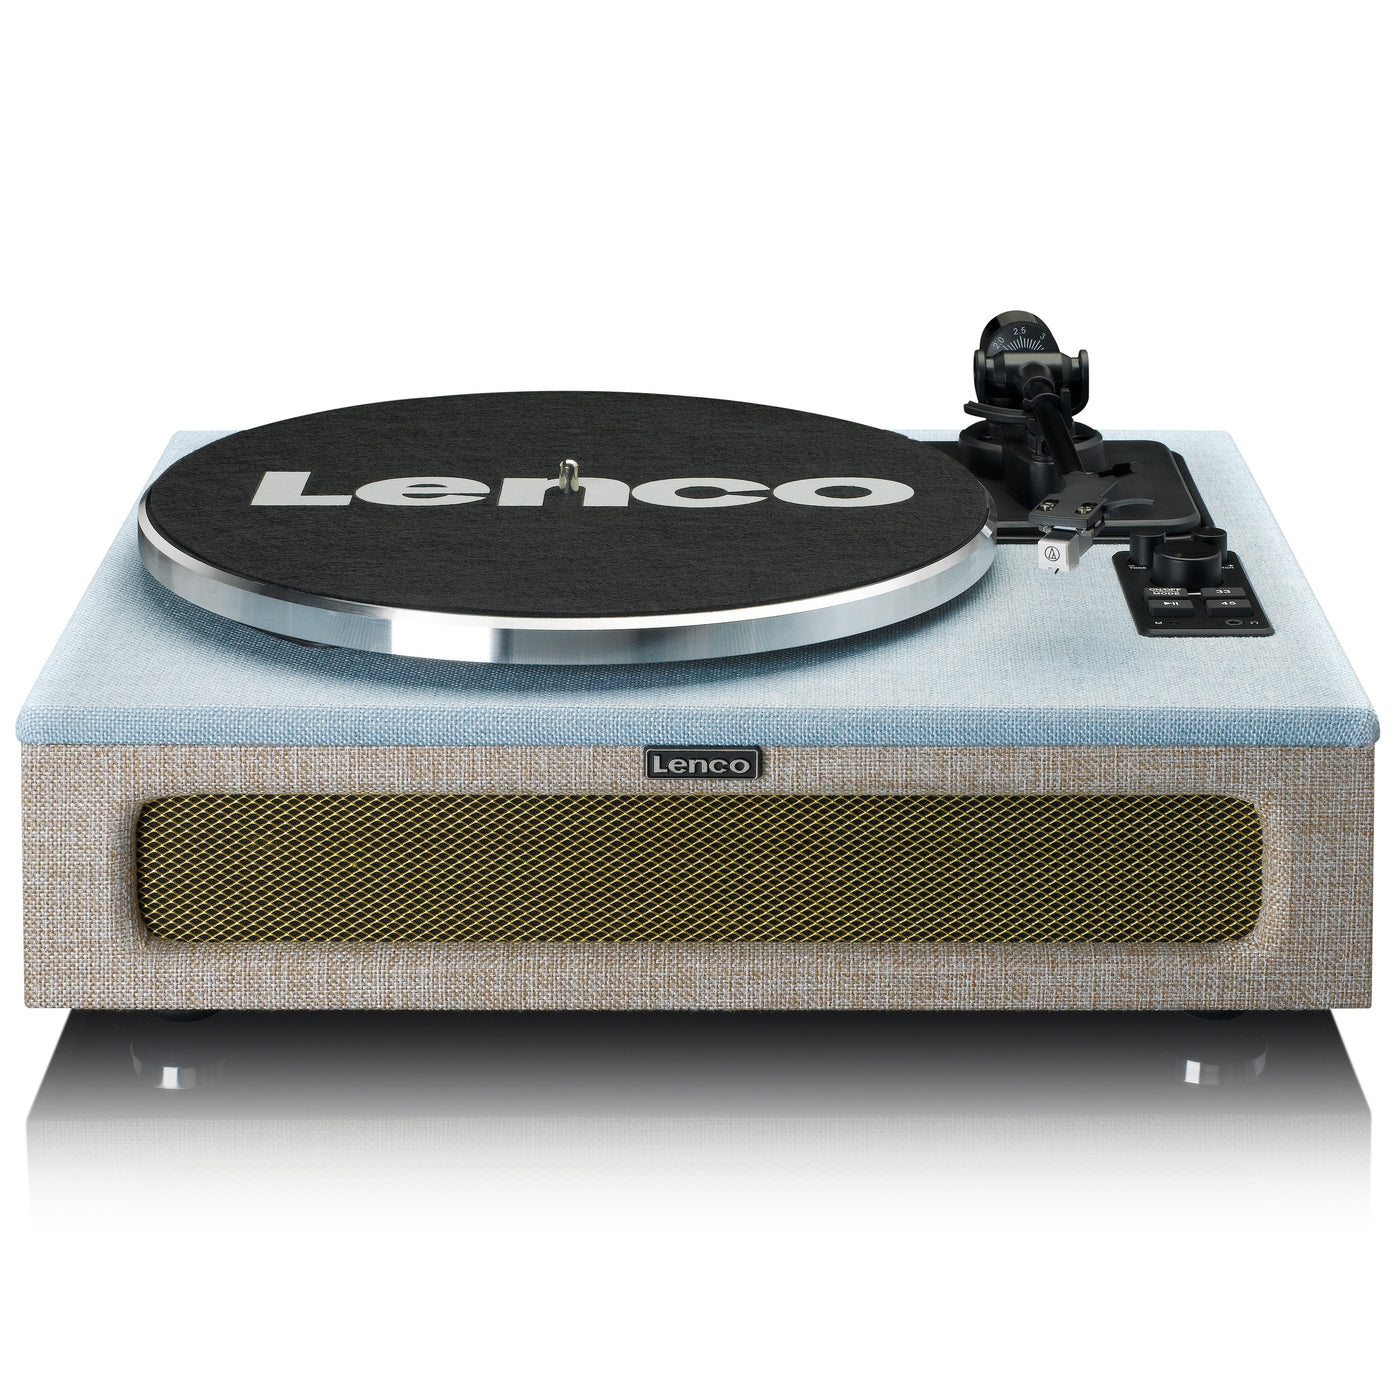 LENCO LS-440BUBG - Record Player with 4 built-in speakers - Fabric